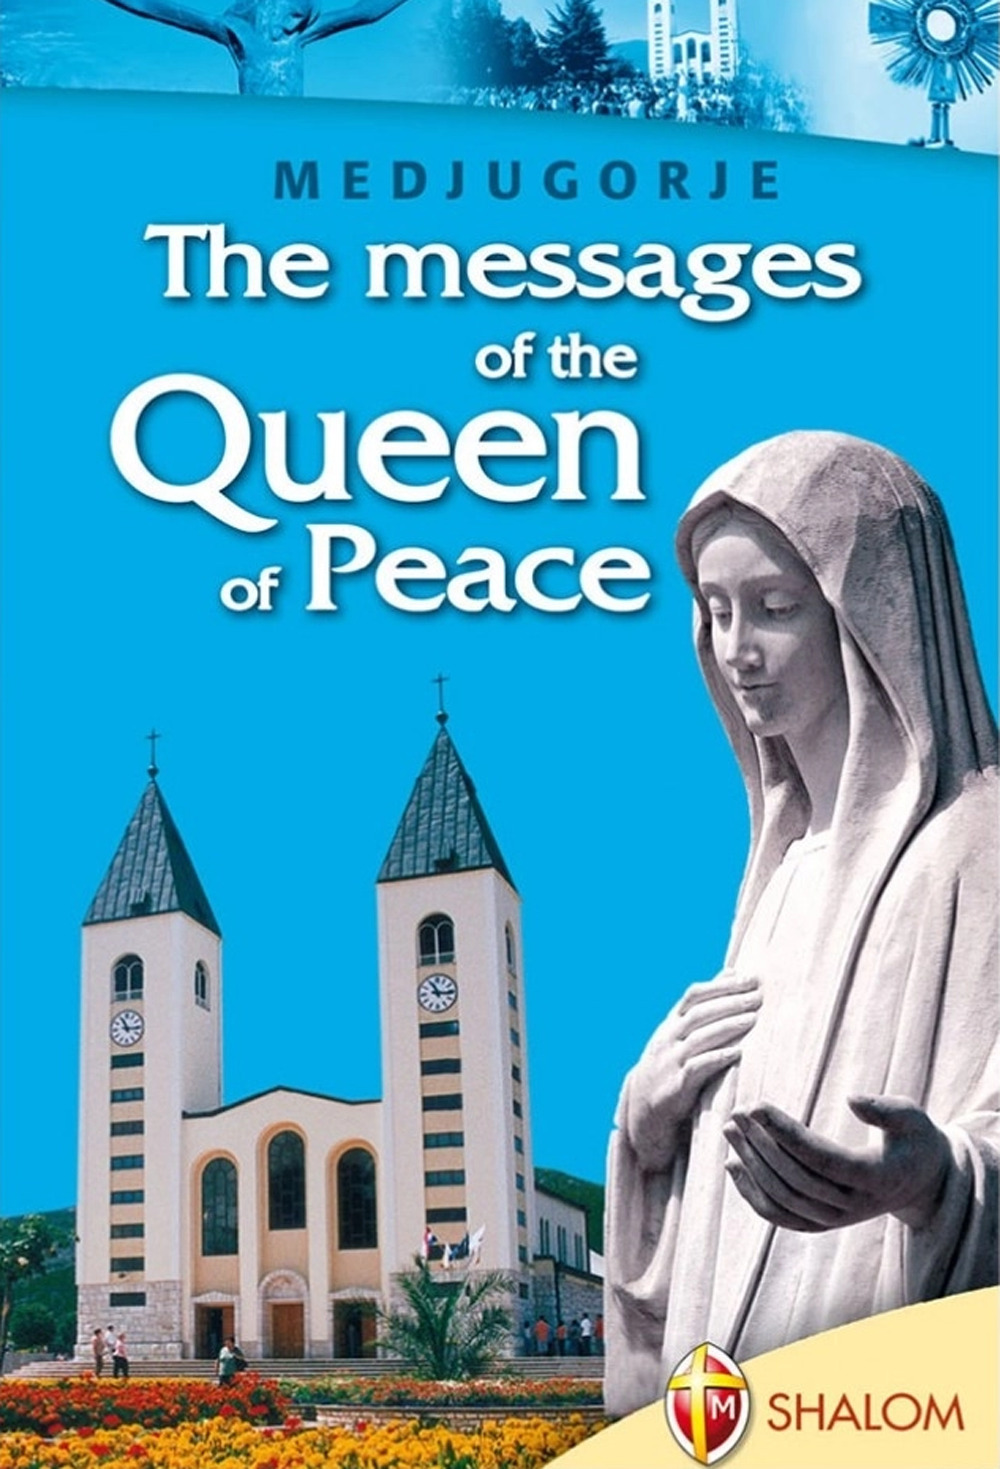 The messages of the Queen of Peace